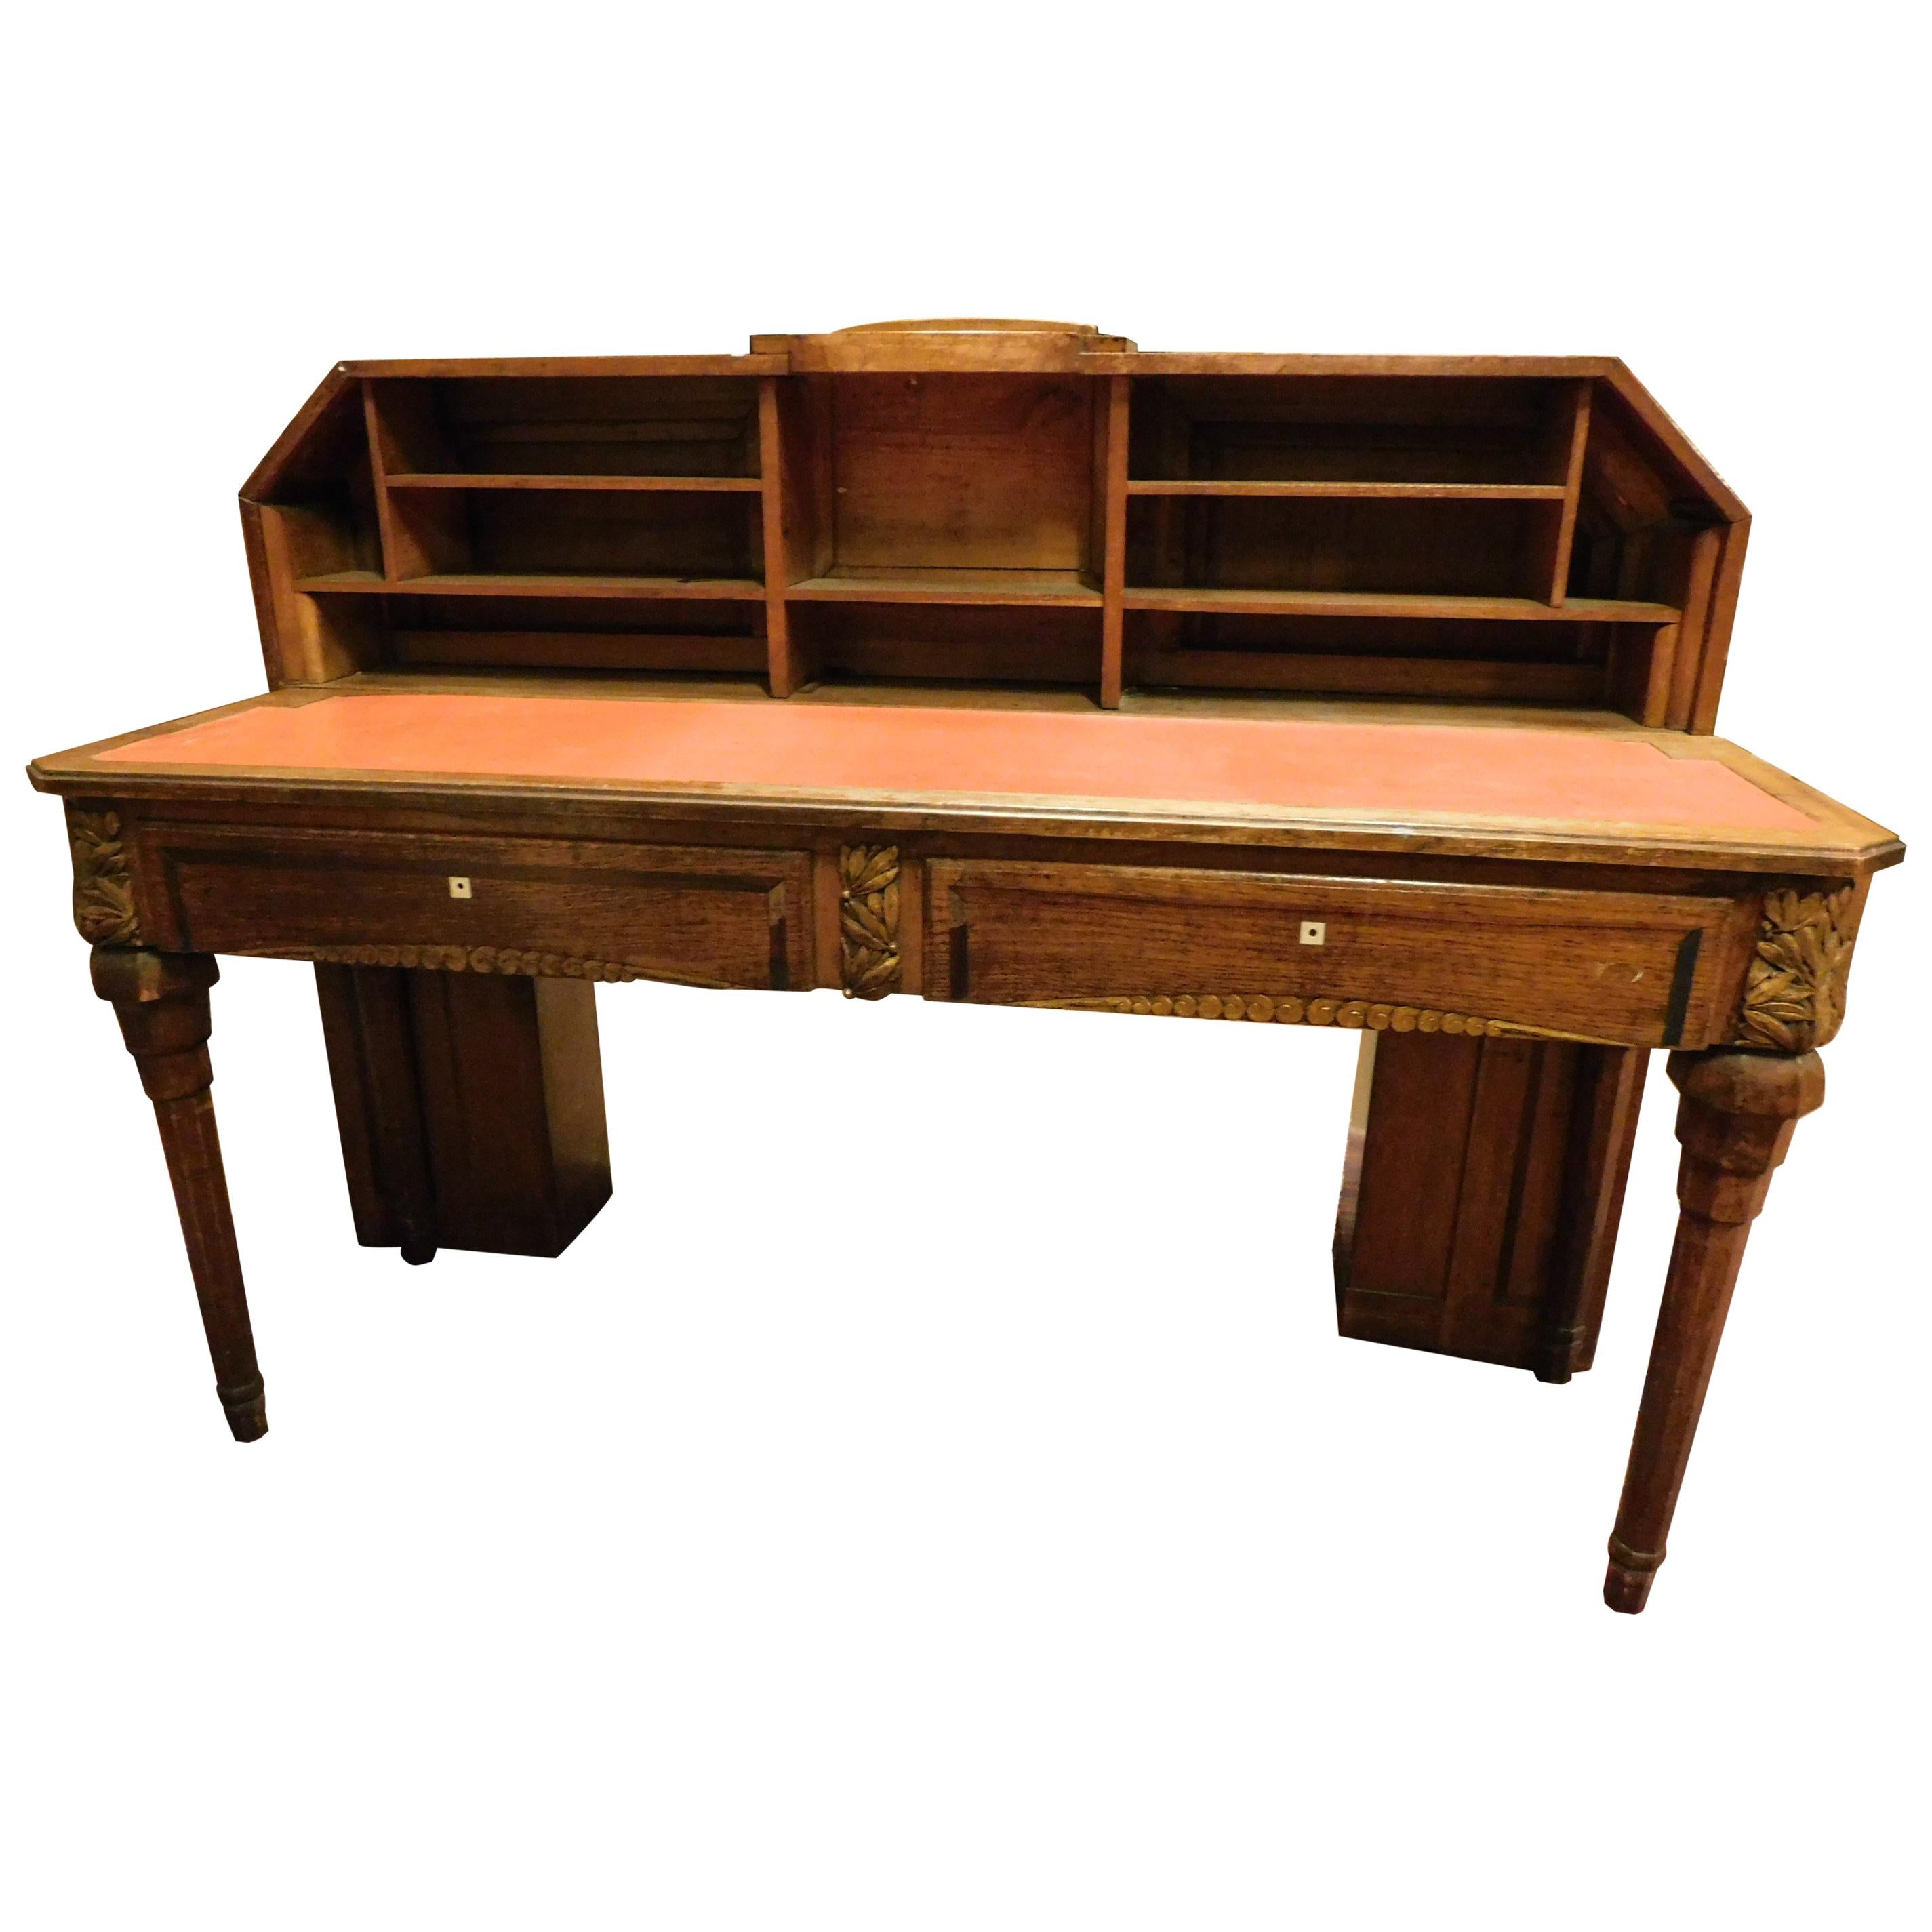 1930s, Antique Reception Desk, Table for Drawers, Very Capacious, Vintage